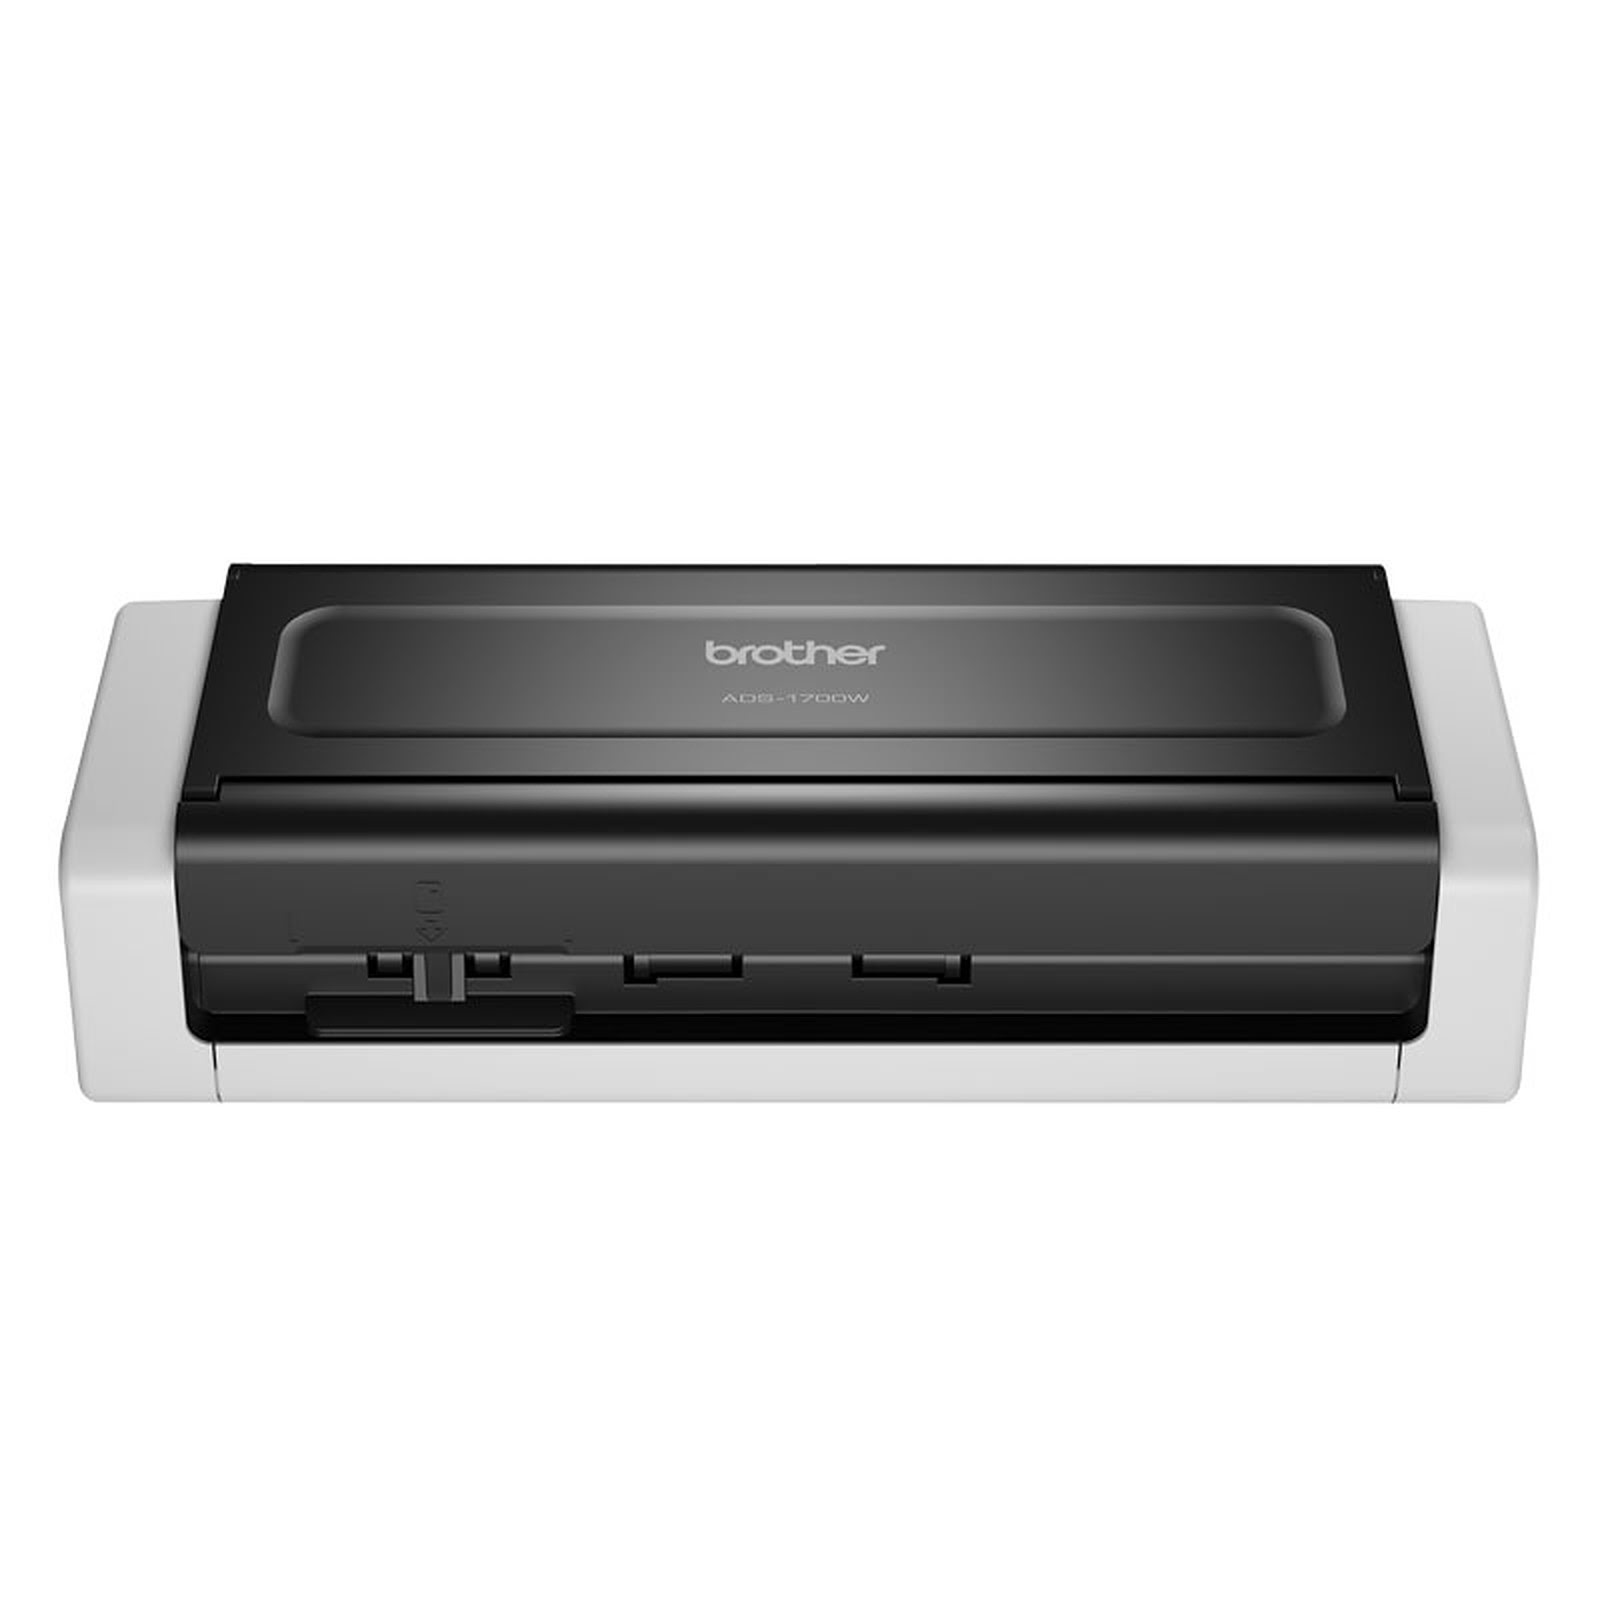 Brother ADS-1700W - Scanner Brother - grosbill-pro.com - 2